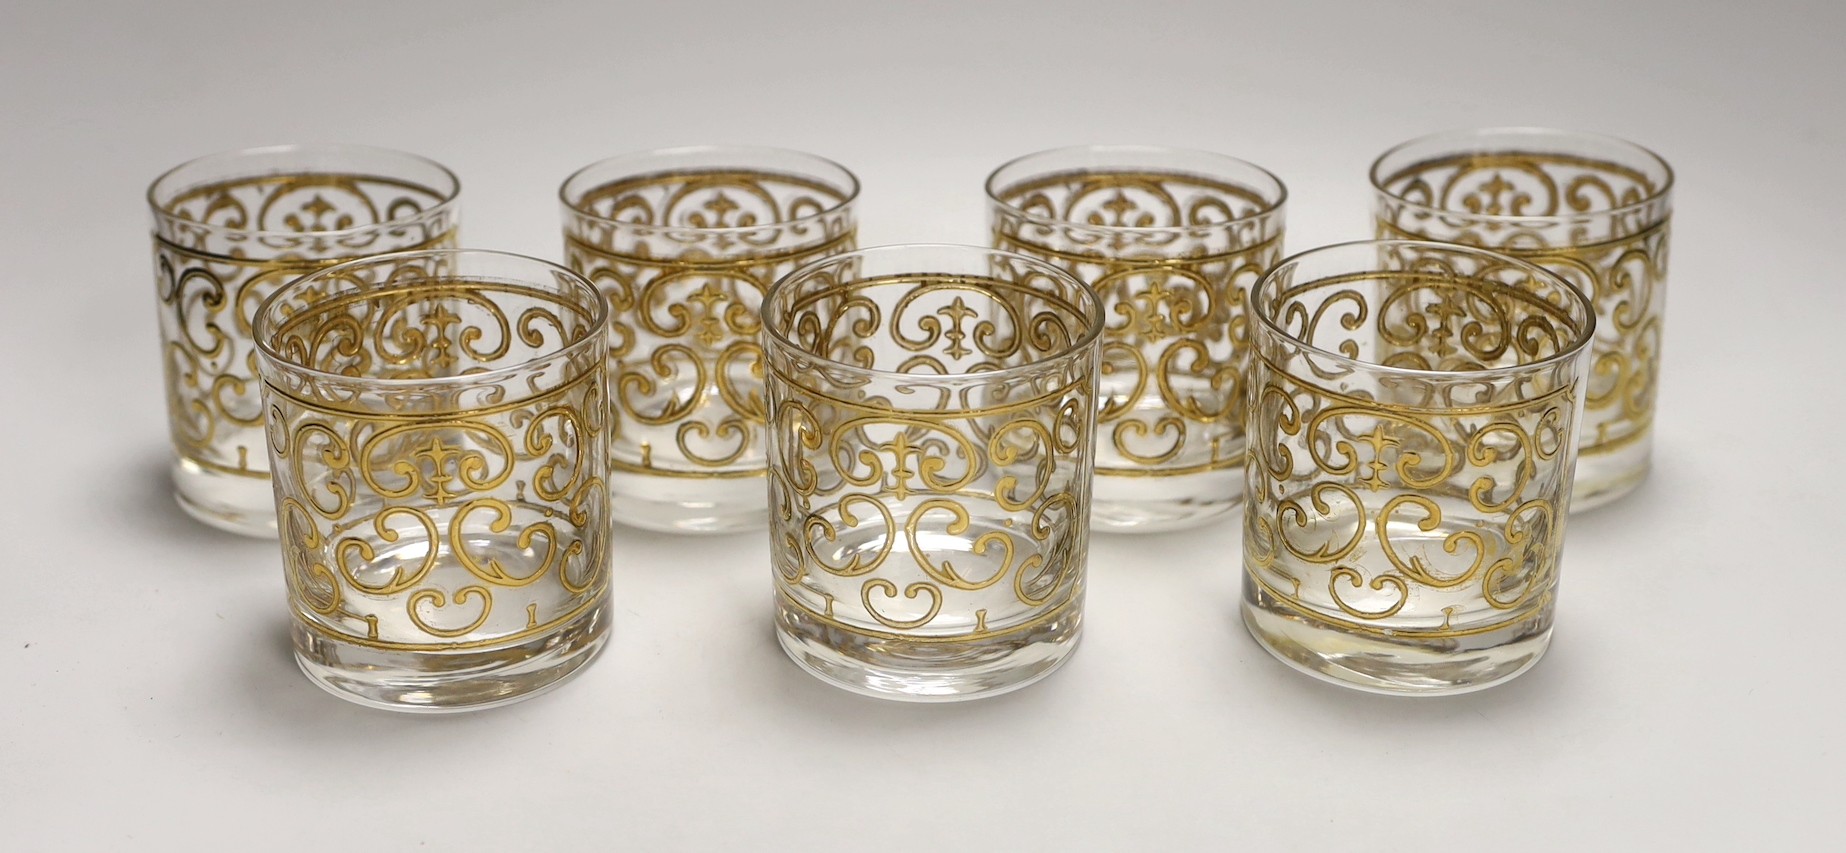 A set of seven Georges Briard gilded glass tumblers                                                                                                                                                                         